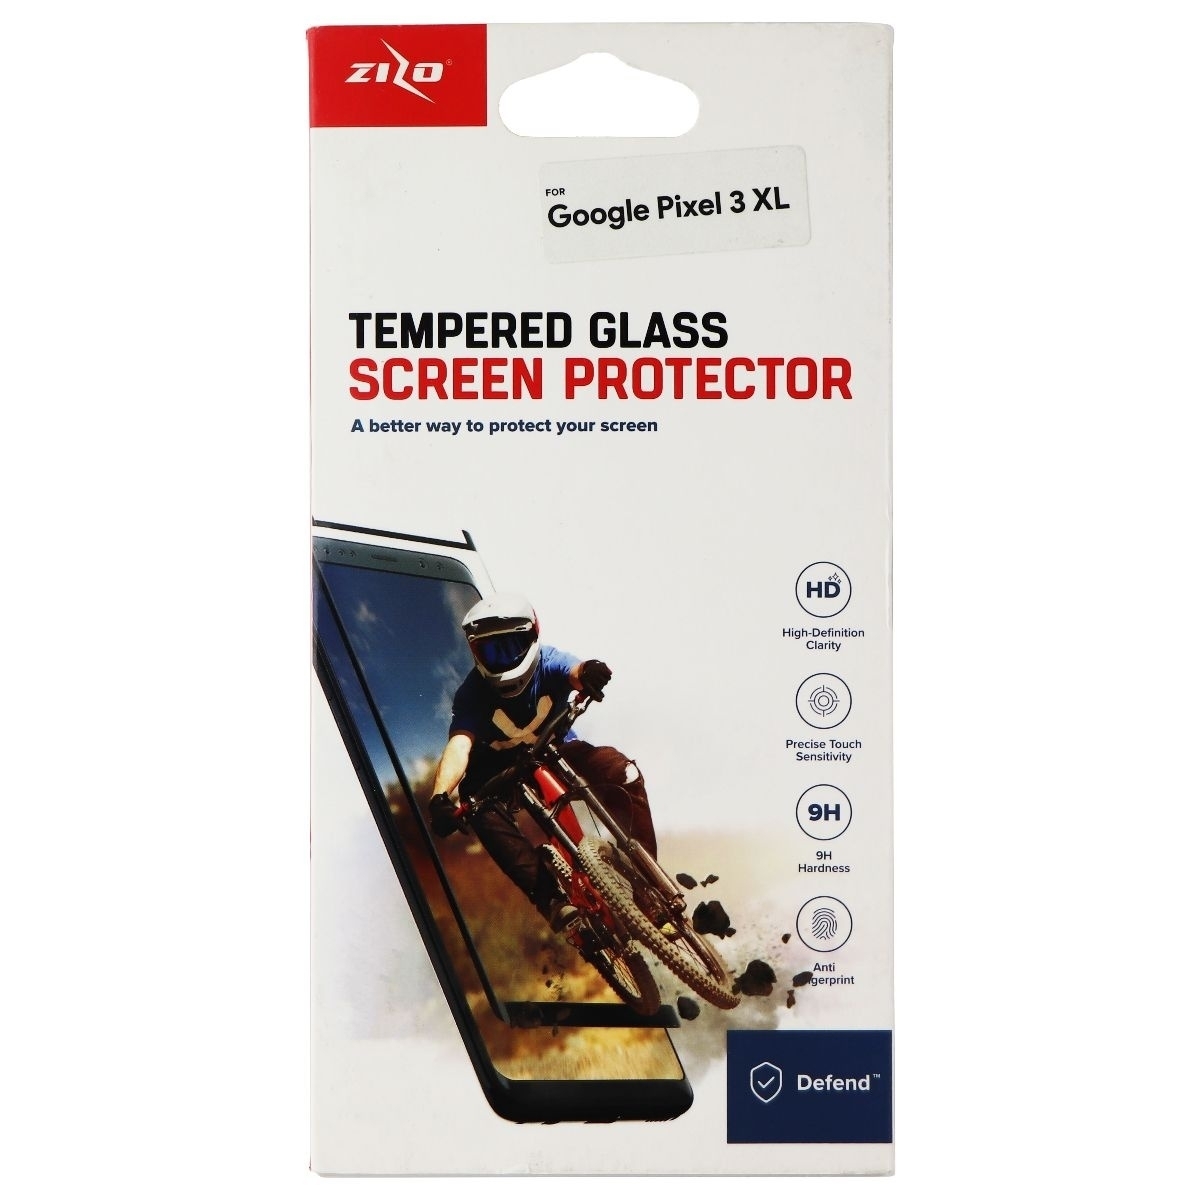 Zizo Tempered Glass Screen Protector For Google Pixel 3 XL Black